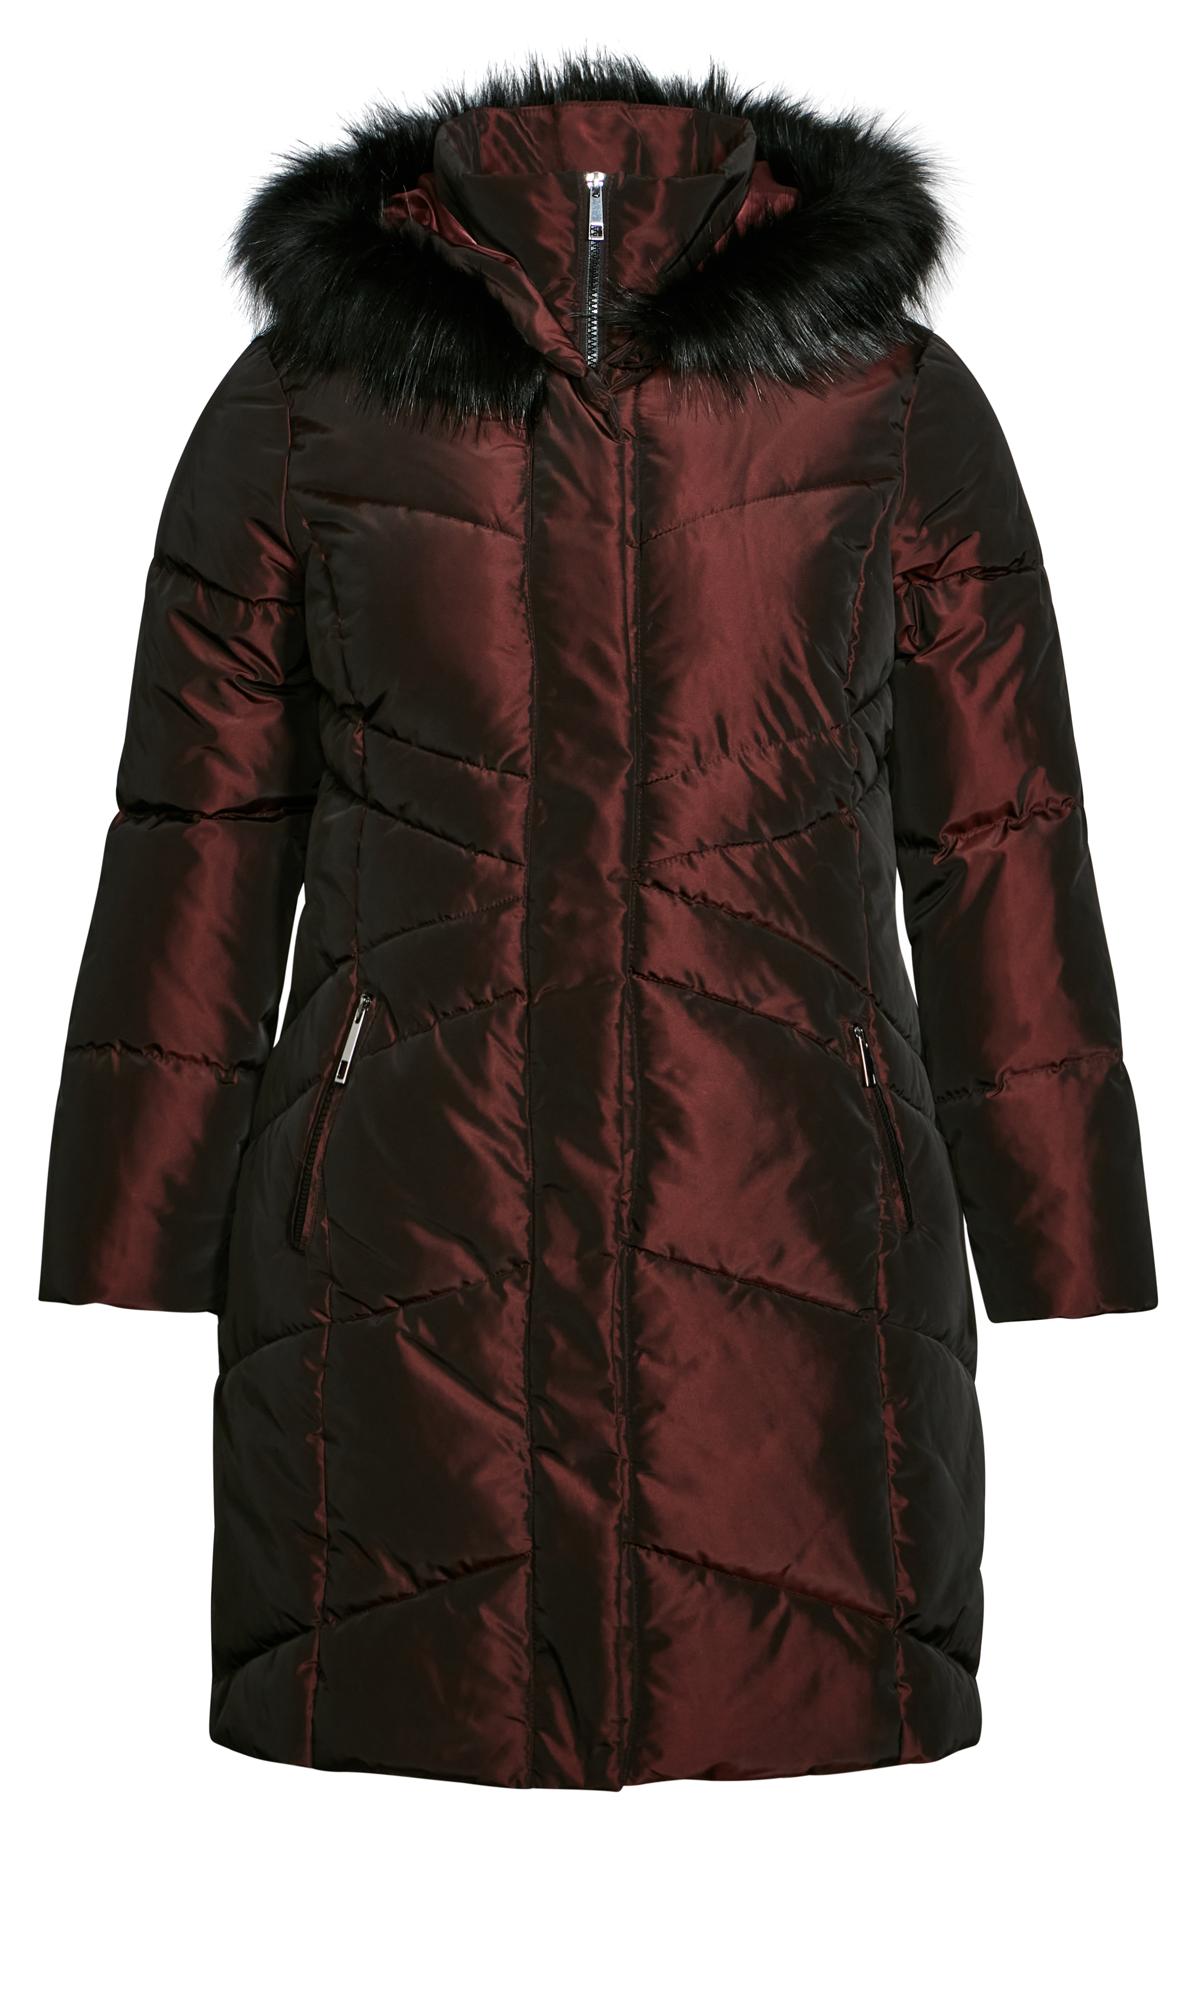 Two Tone Berry Padded Coat 2